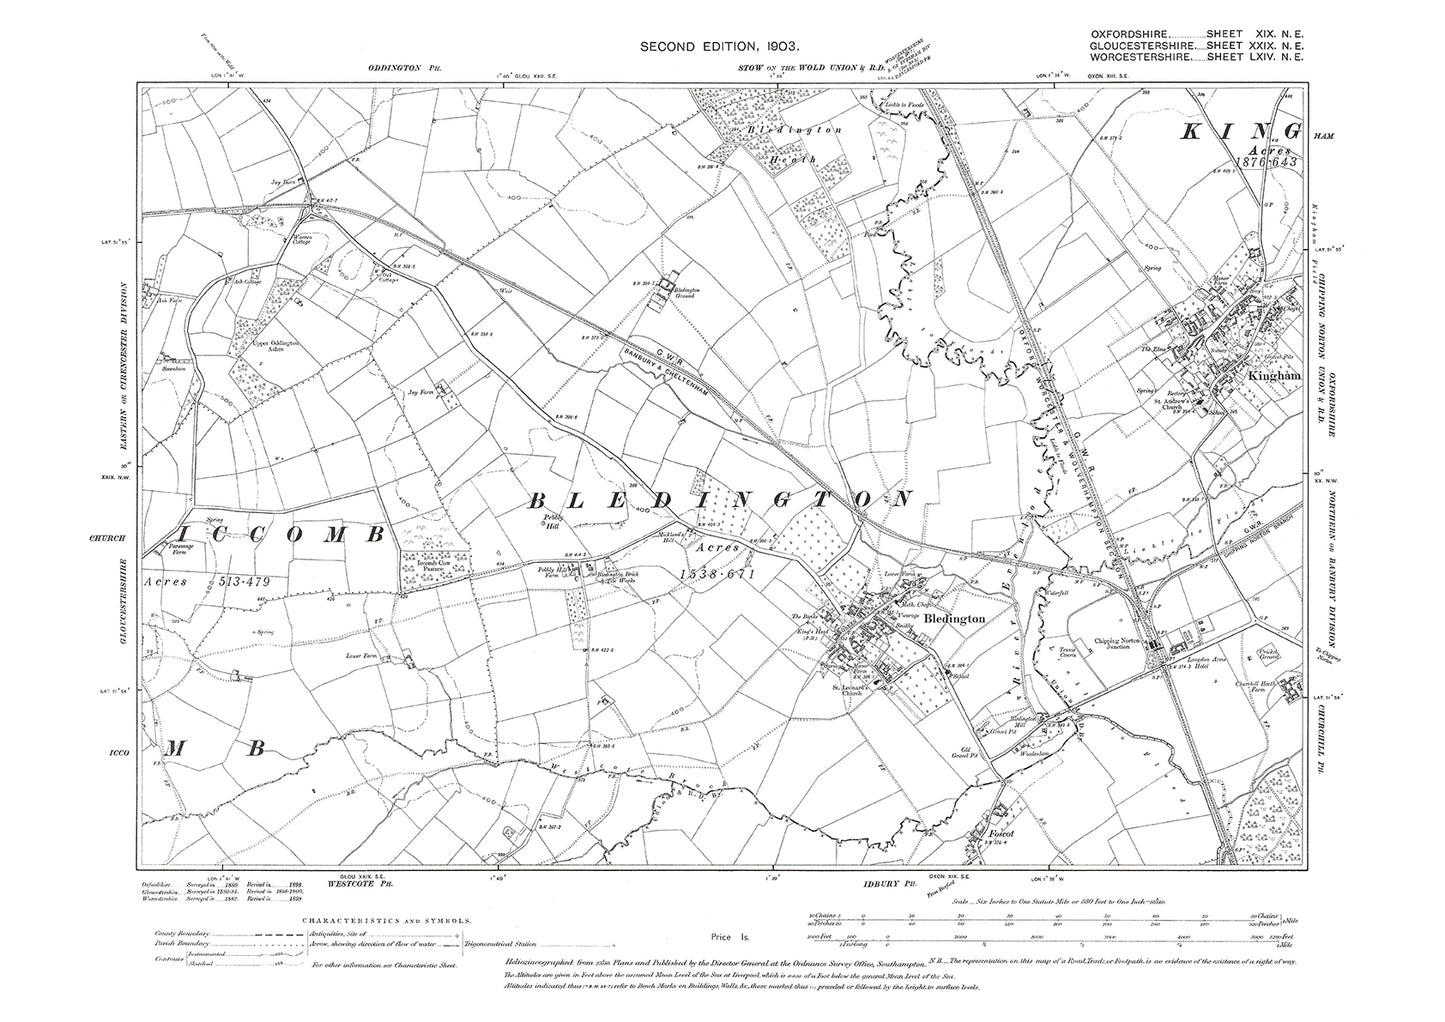 Old OS map dated 1903, showing Bledington in Gloucestershire - 29NE